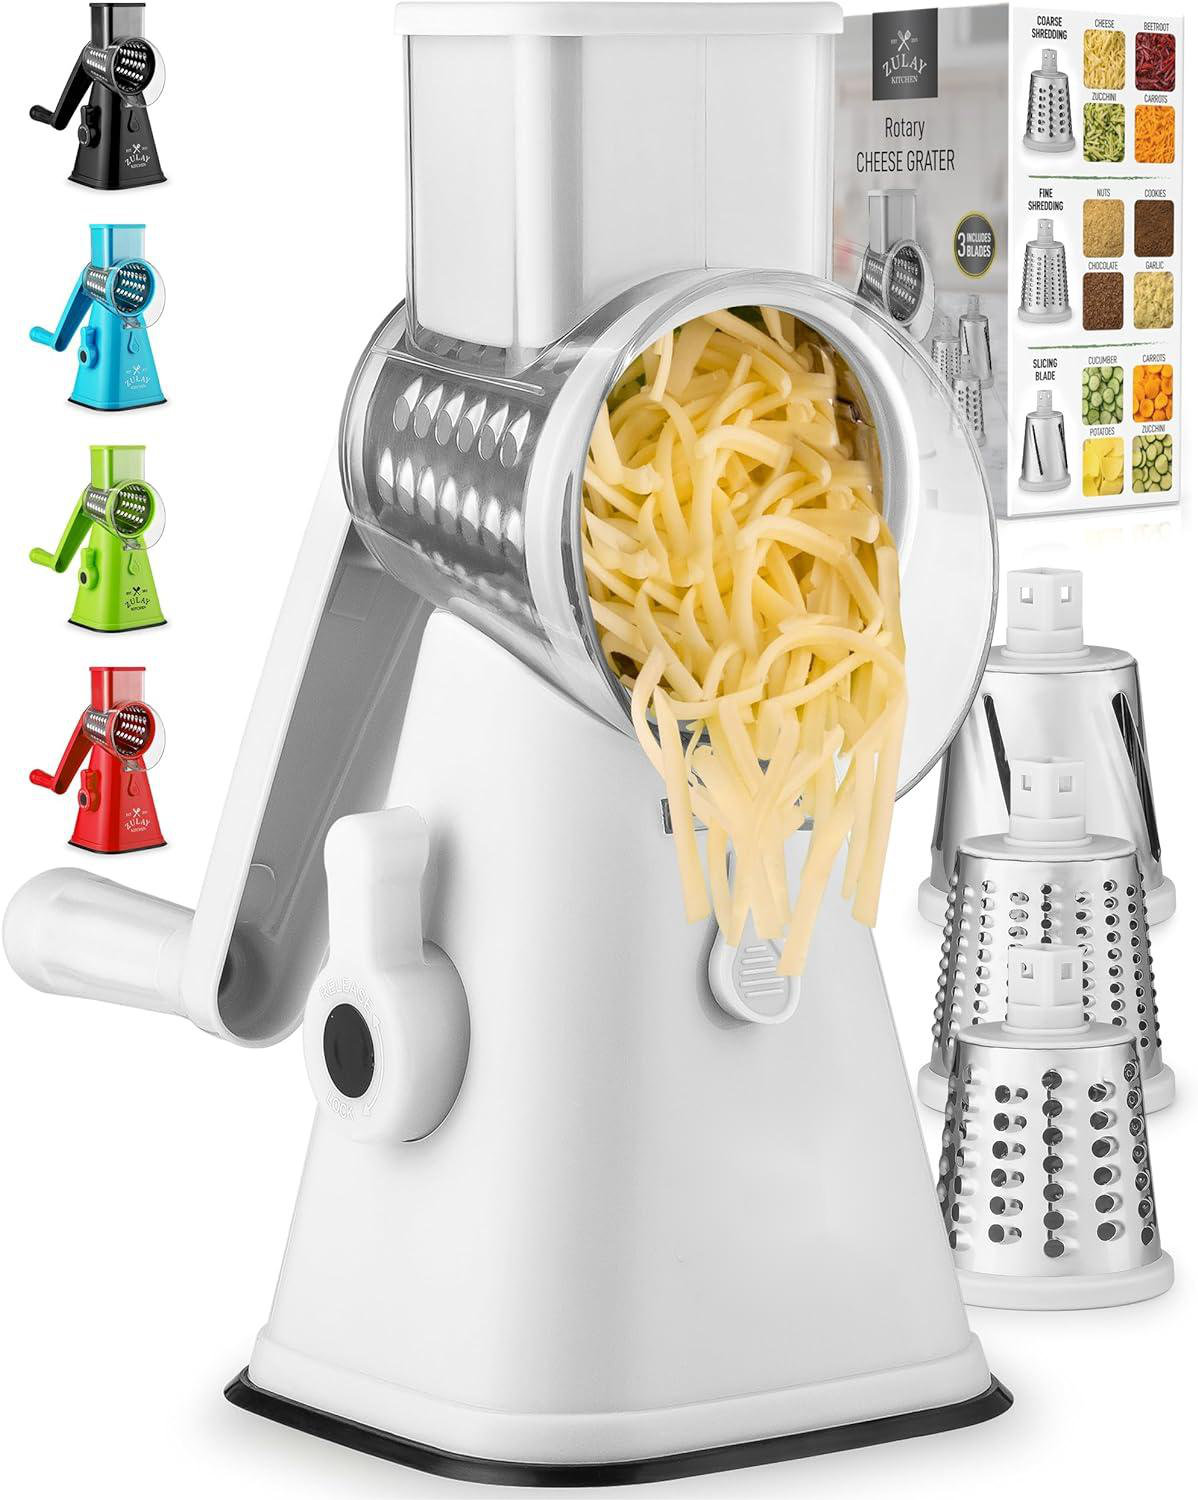 Elaine Mercure Rotary Cheese Grater With Upgraded, Reinforced Suction Round Cheese  Shredder Grater With 3 Replaceable Stainless Steel Drum Blades Easy To Use  Clean Vegetable Slicer Nut Grinder White